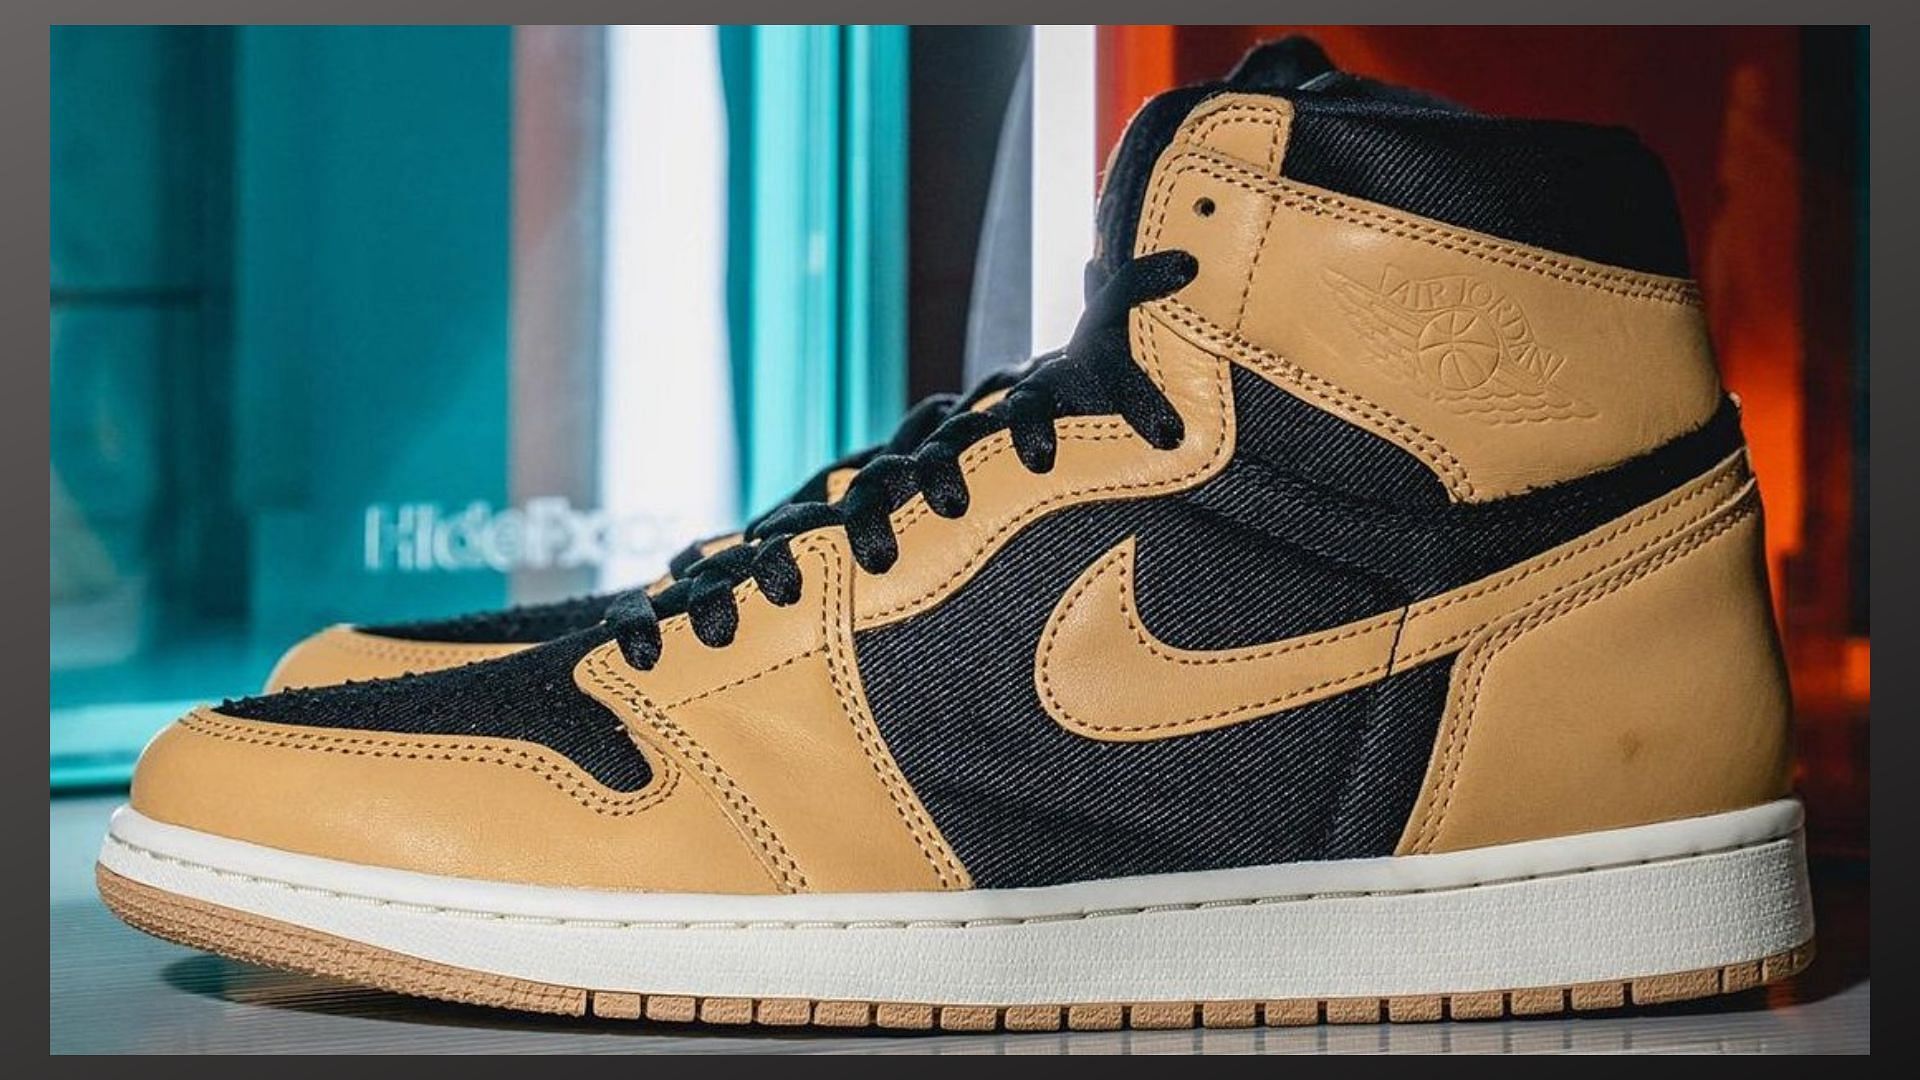 Air Jordan 1 High OG Heirloom shoes are arriving later this year (Image via Twitter/@Sneakerscouts)